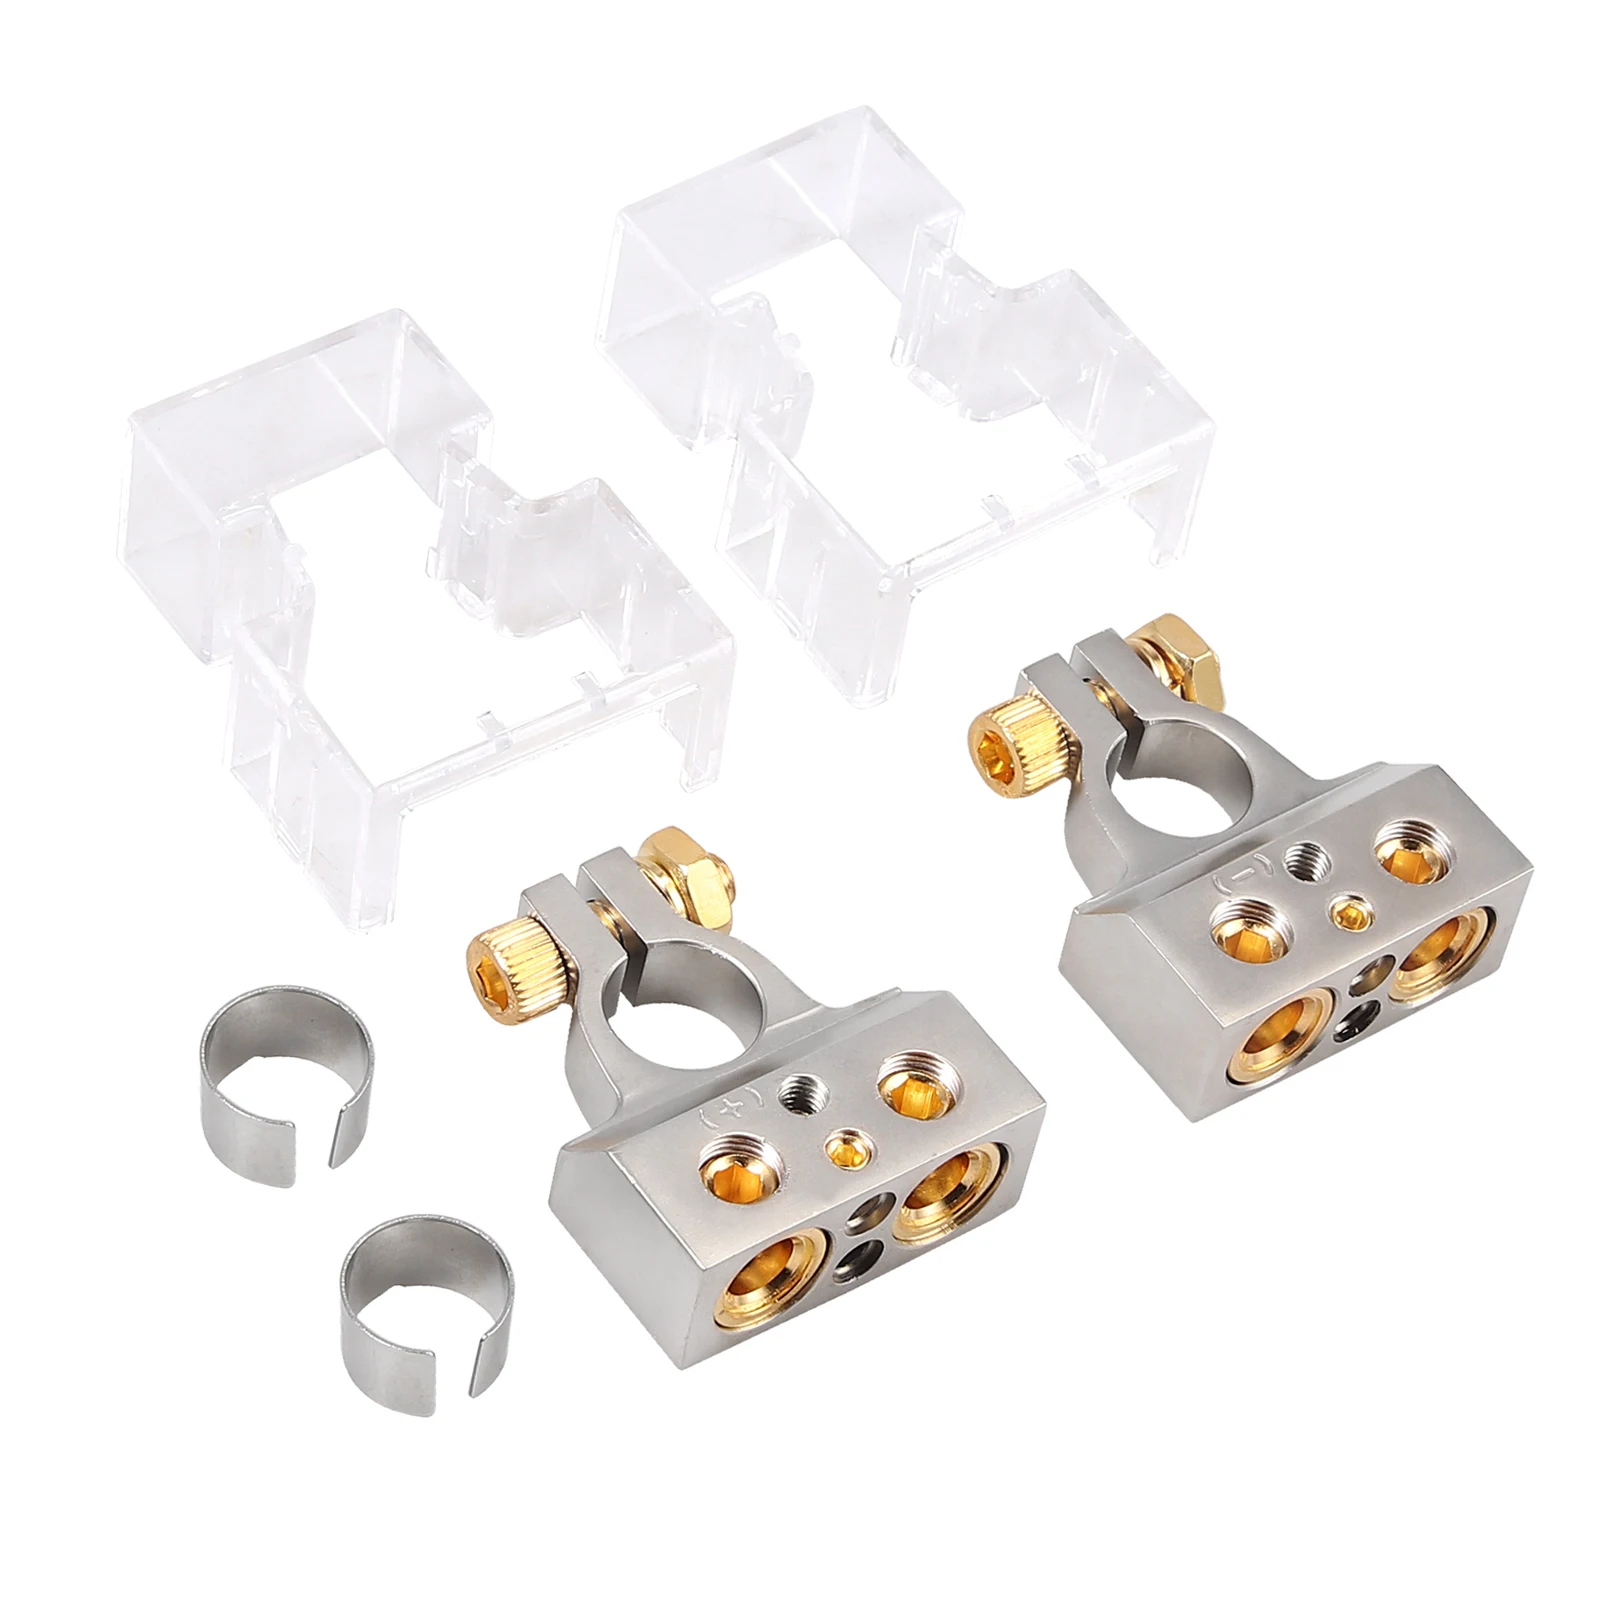 AUTOUTLET 2PCS Car Battery Terminal Connectors Kit with Voltmeter,0/4/8/10 Gauge AWG Positive Negative Battery Post Clamp and Shims with Clear Covers 